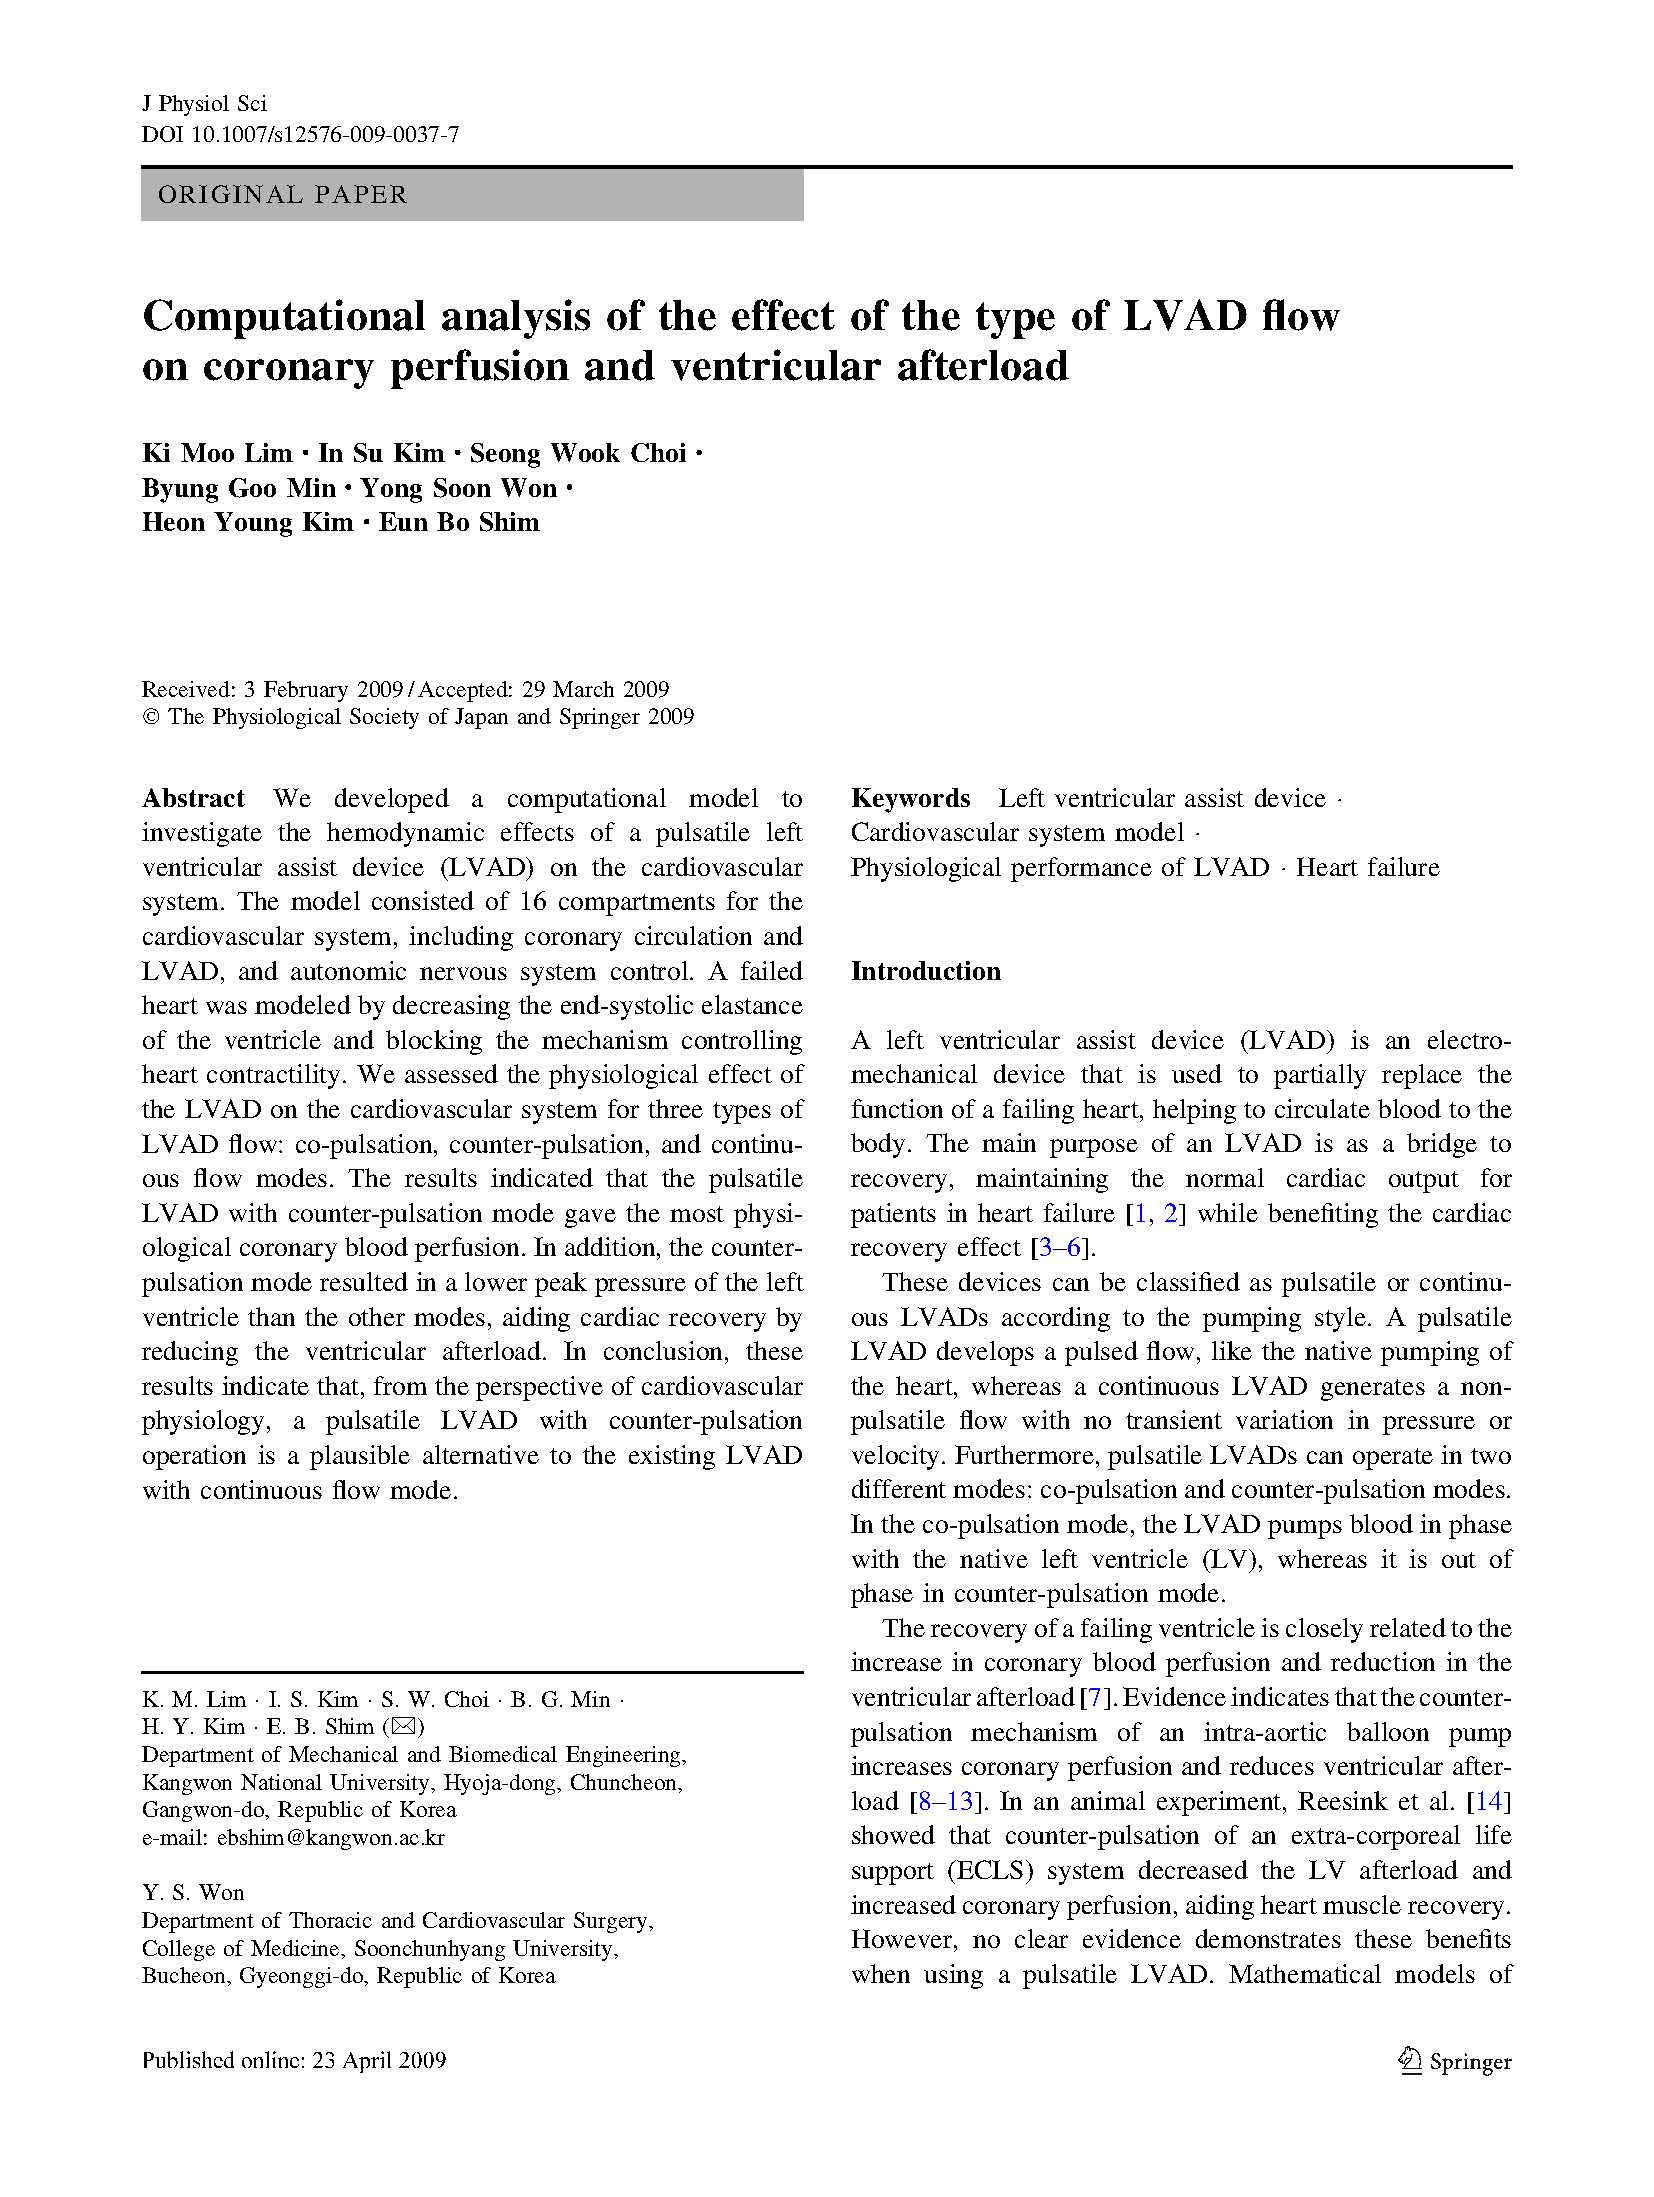 Computational analysis of the effect of the type of LVAD flowon coronary perfusion and ventricular afterload.jpg 1654X2197